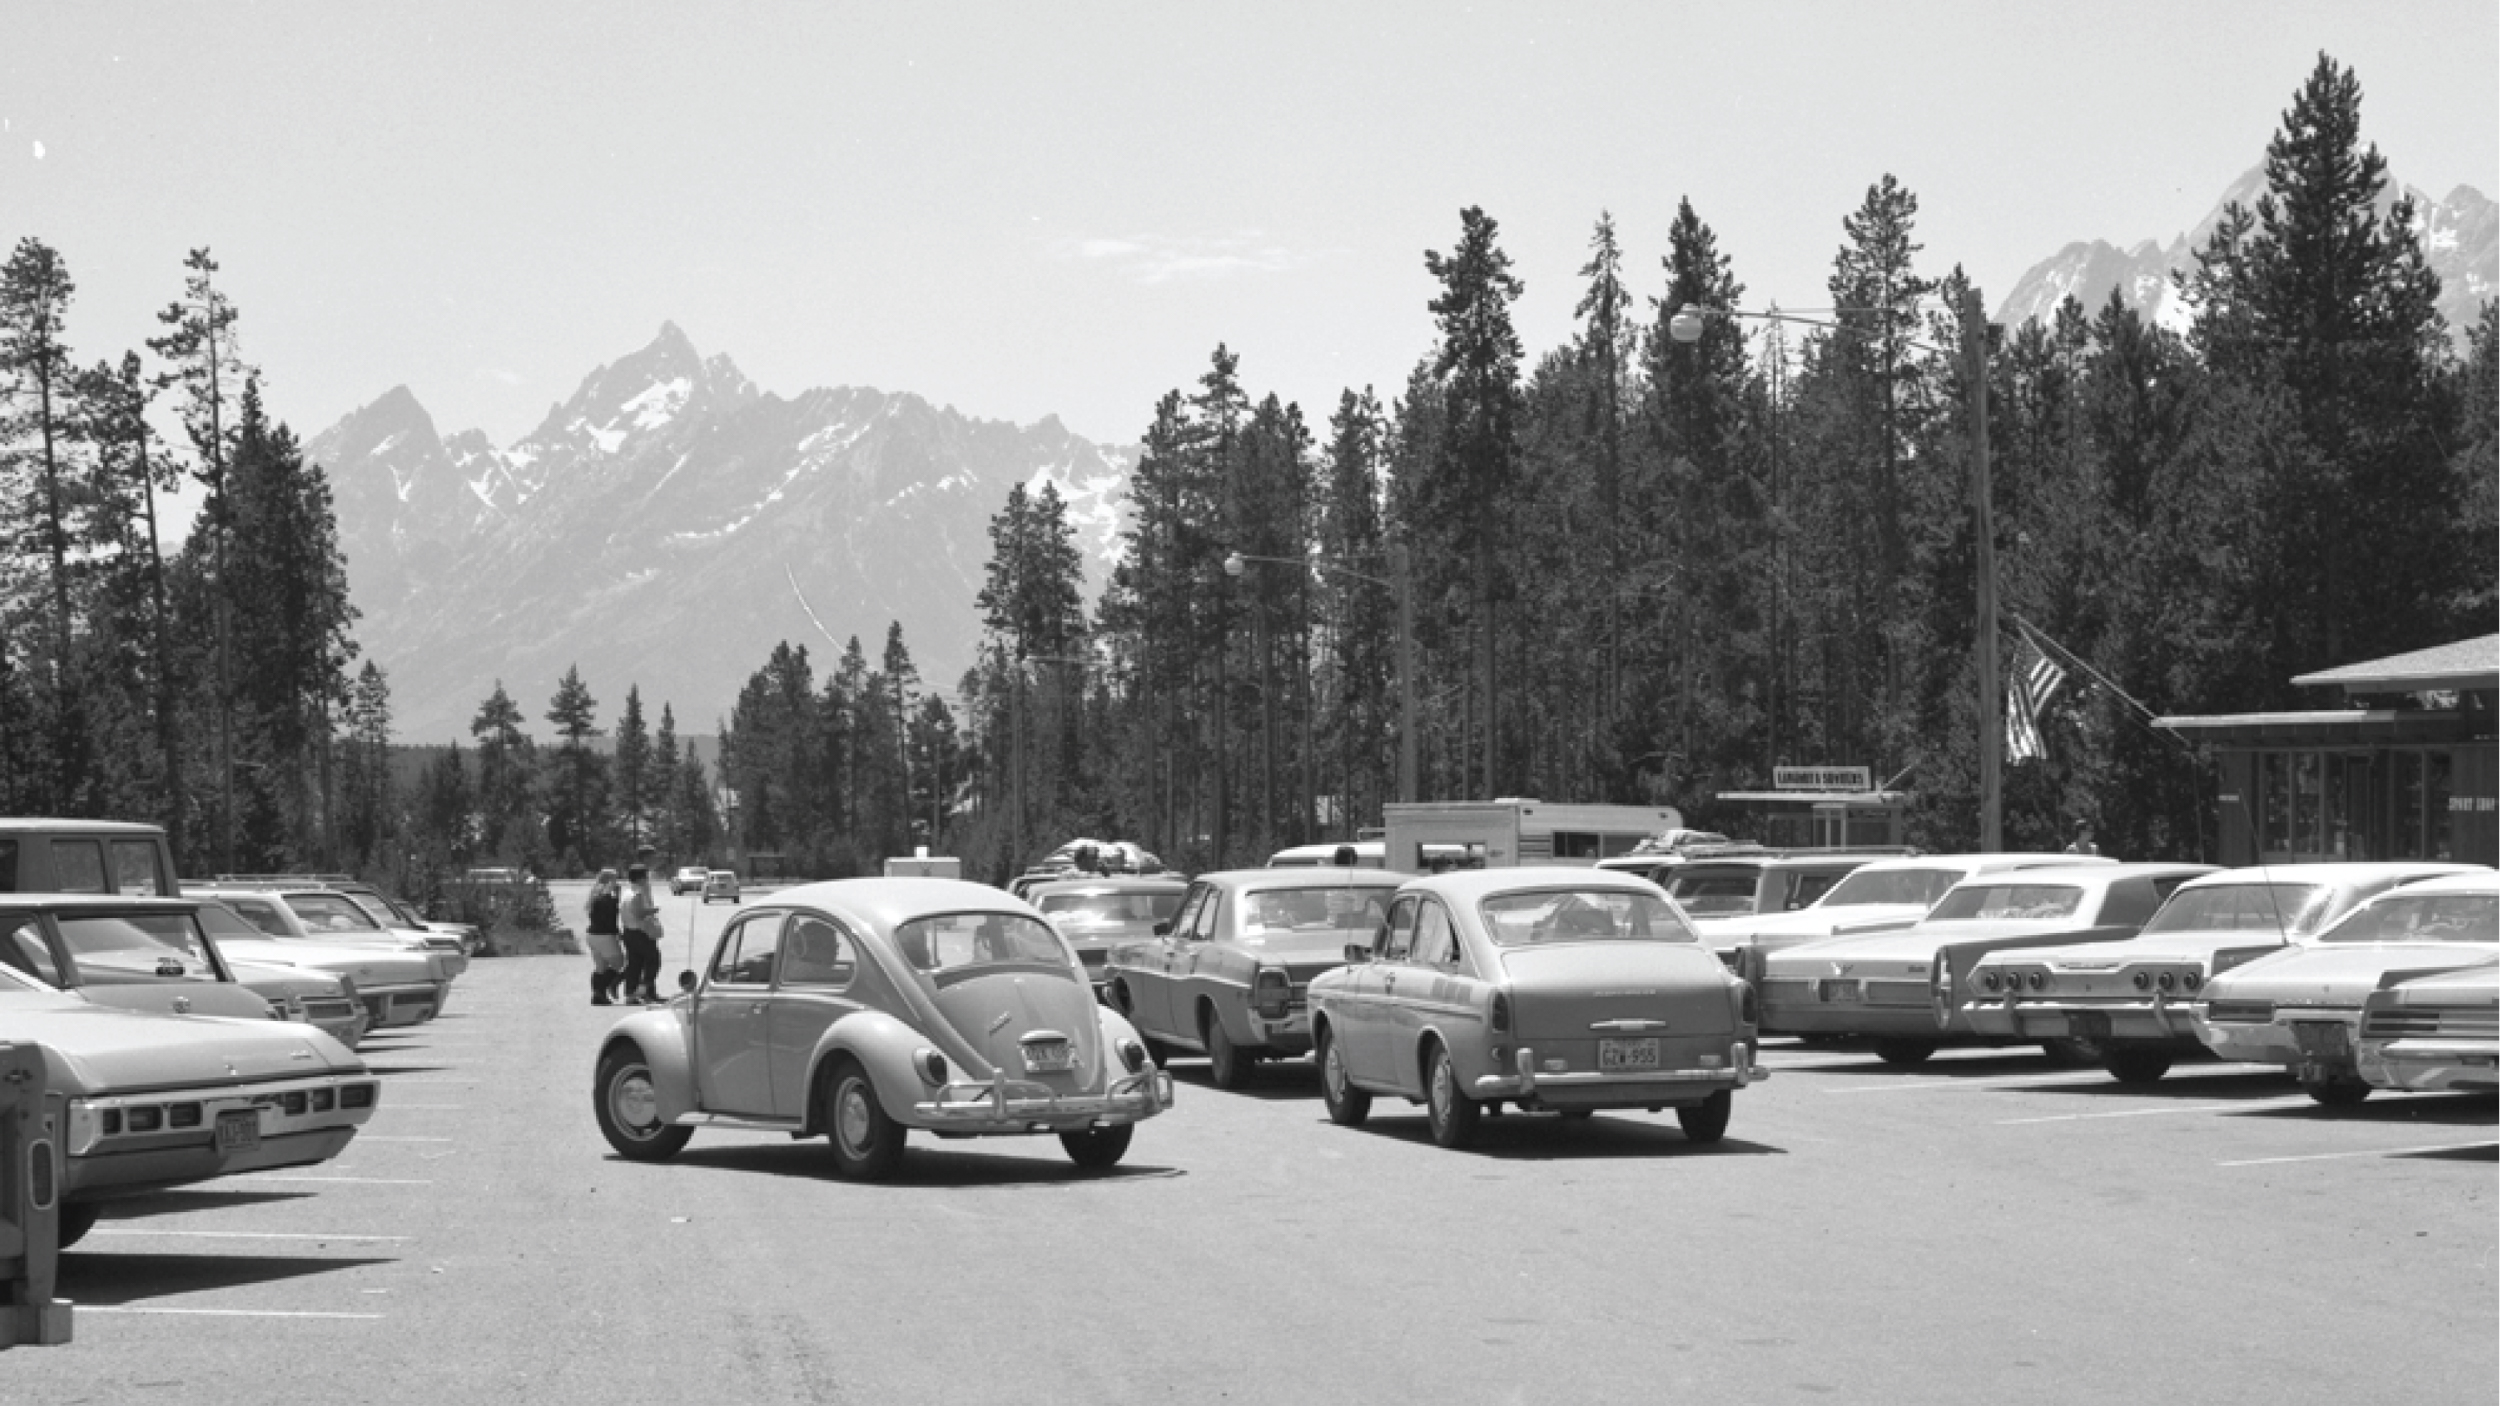 Historic black and white photo of Colter Bay Village parking lot with the Tetons in the distance